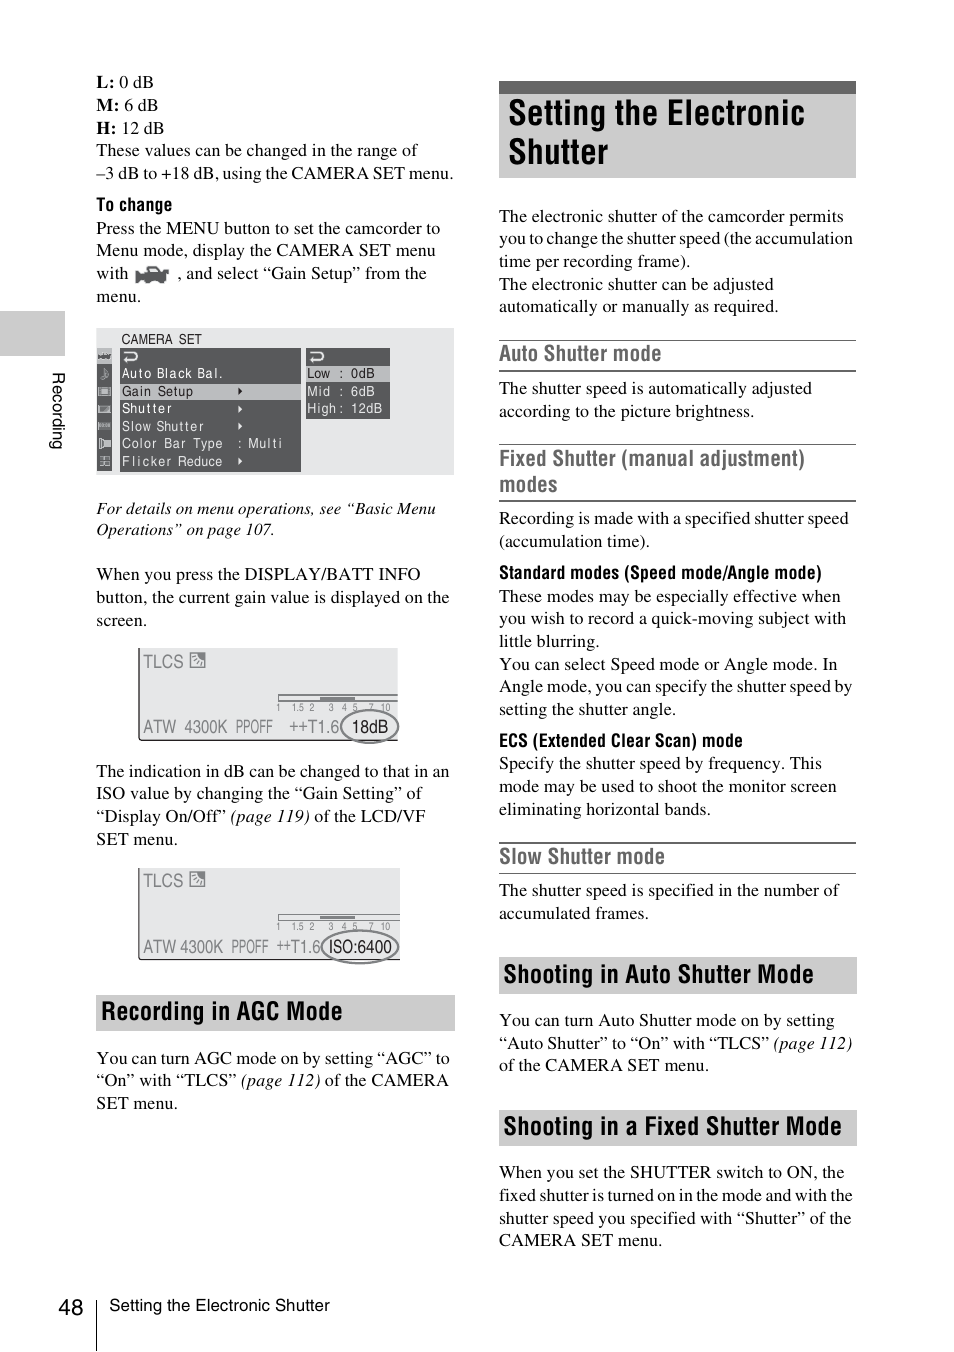 Recording in agc mode, Setting the electronic shutter, Shooting in auto shutter mode | Shooting in a fixed shutter mode, Auto shutter mode, Fixed shutter (manual adjustment) modes, Slow shutter mode | Sony PMW-F3K User Manual | Page 48 / 164